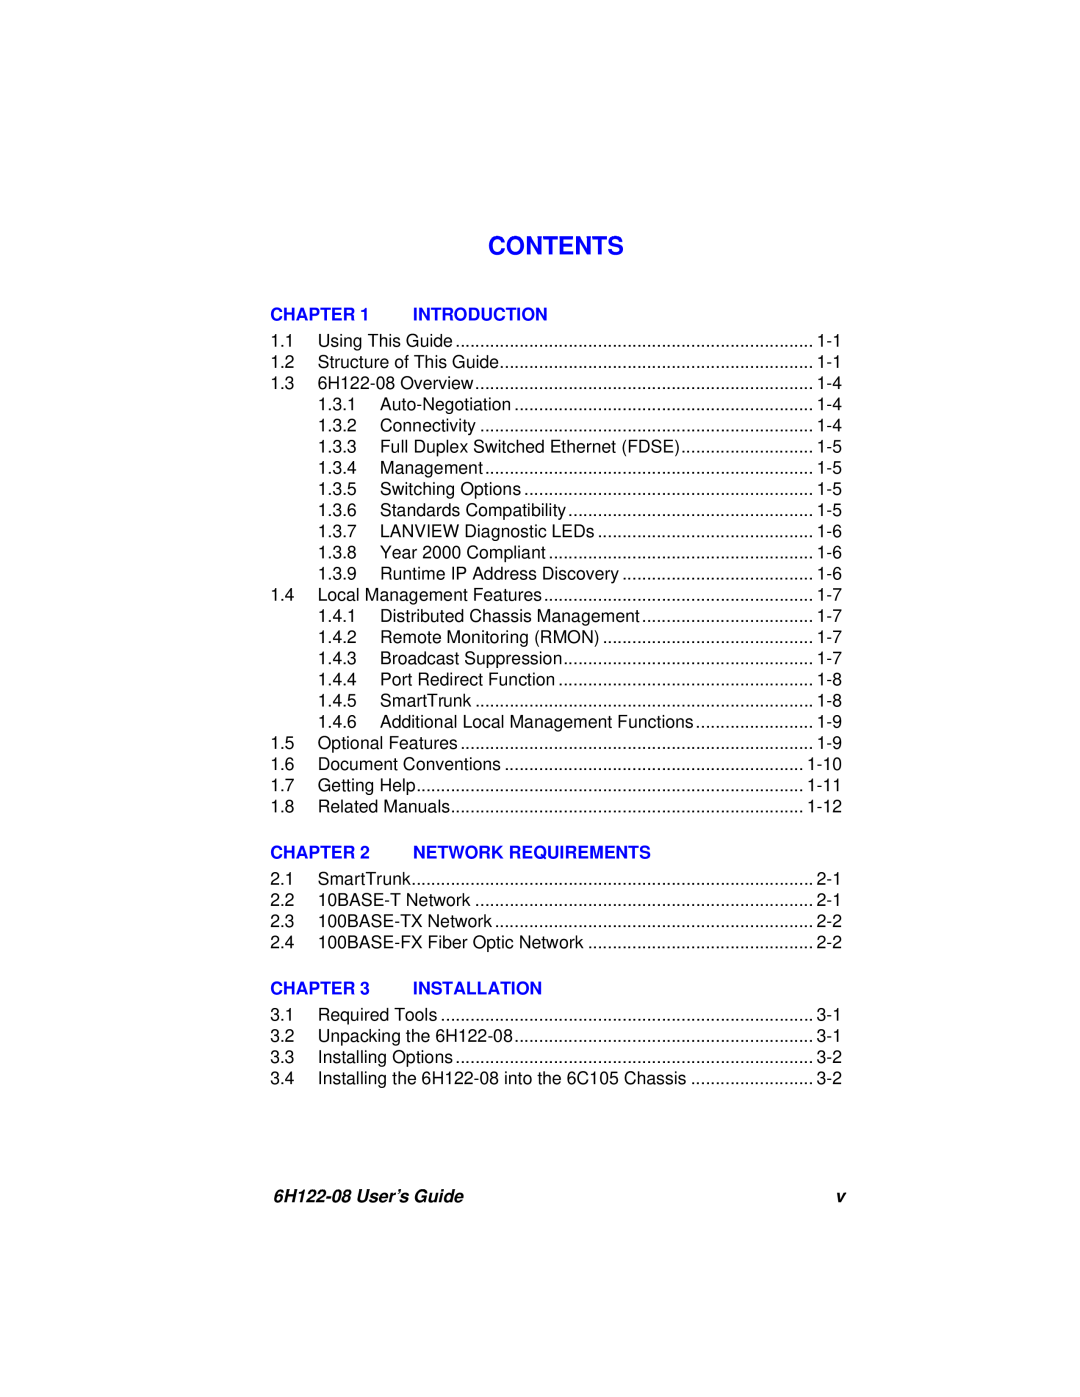 Cabletron Systems manual Contents, Chapter, Introduction, Network Requirements, Installation, 6H122-08 User’s Guide 